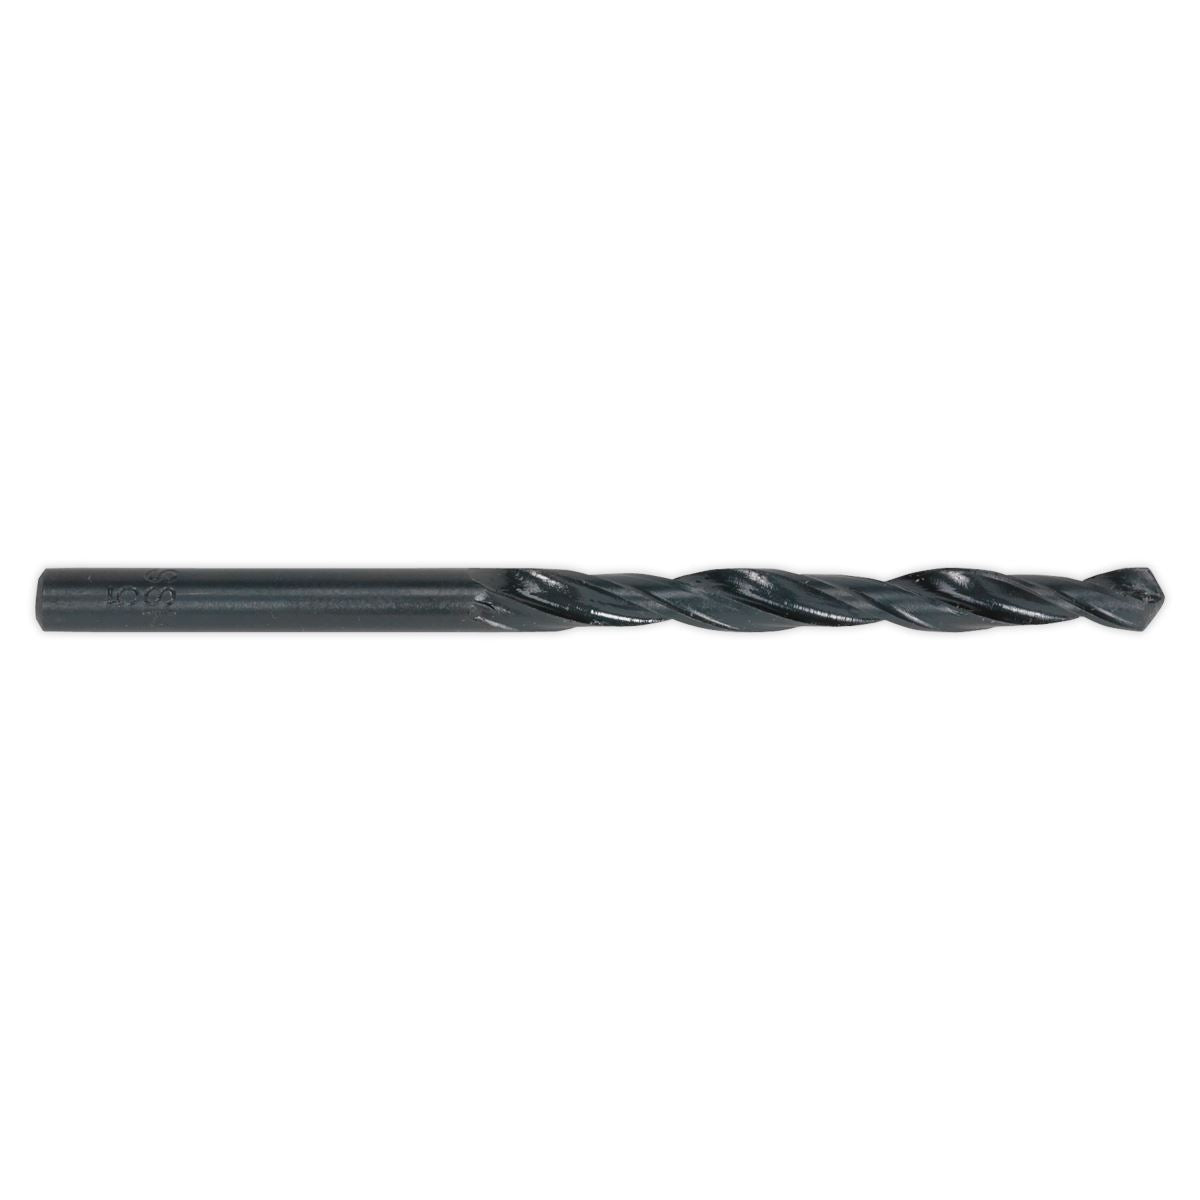 Sealey HSS Roll Forged Drill Bit Ø5mm Pack of 10